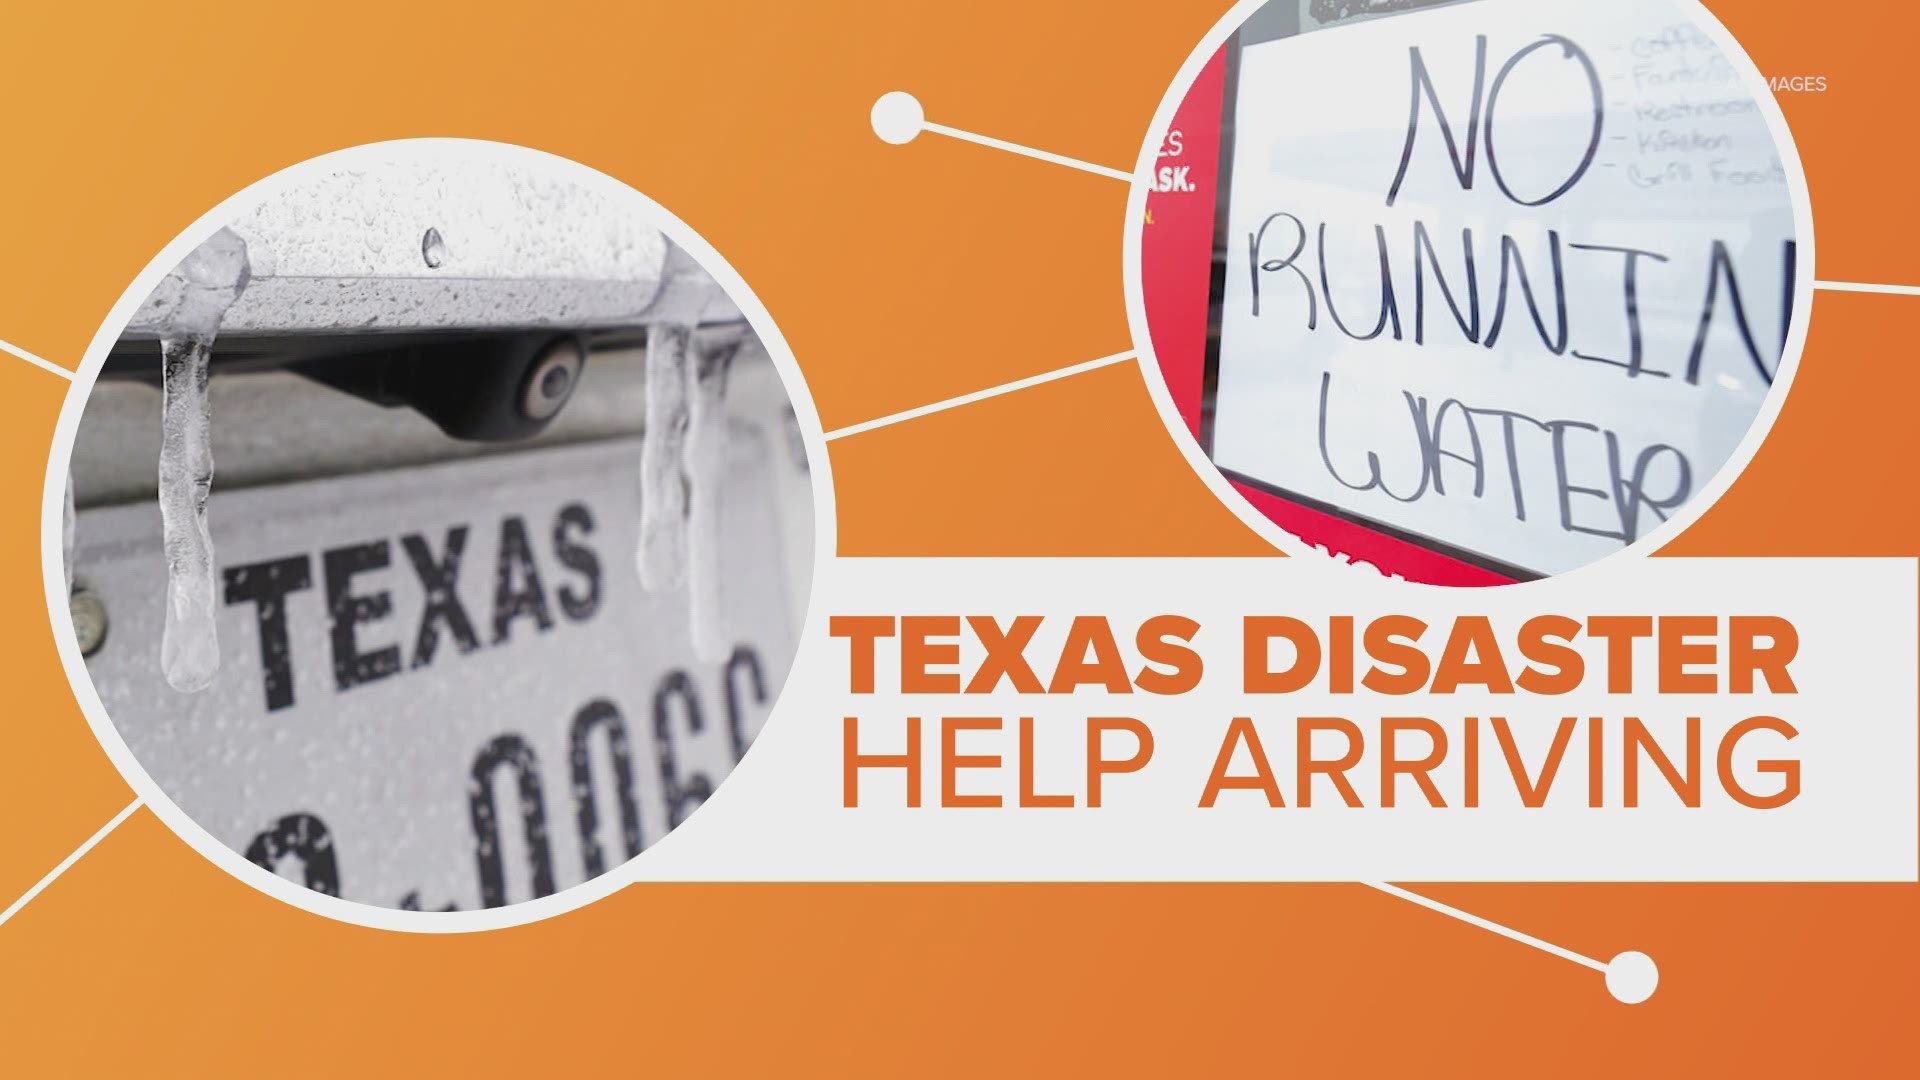 Texas is a disaster area and help is headed in but more help could soon be available thanks to a major disaster declaration. So how does that work?